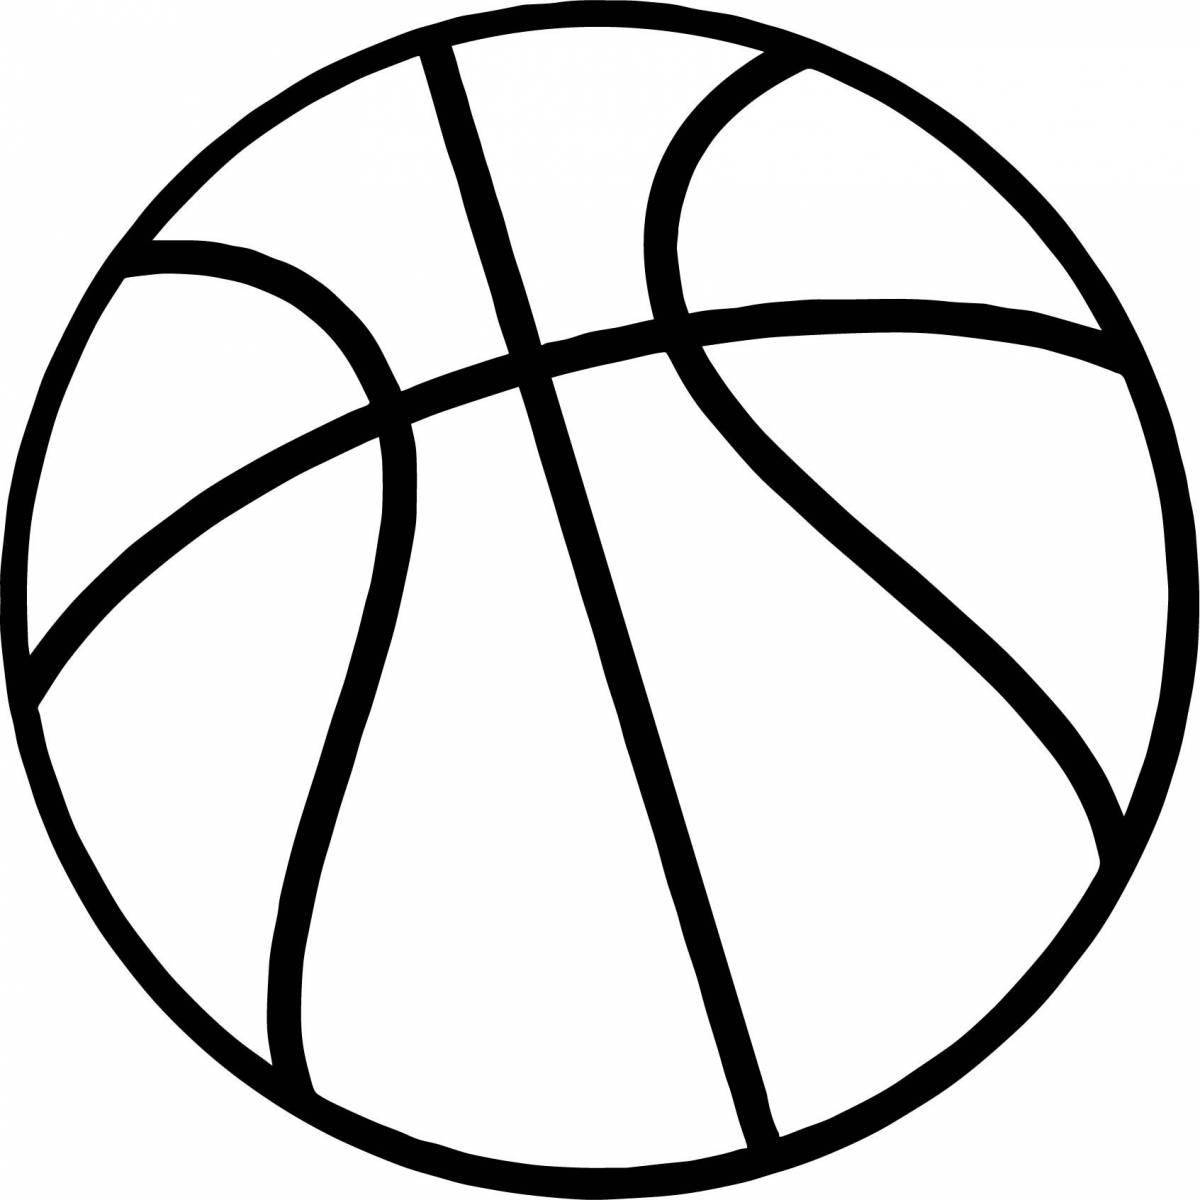 Coloring page dazzling basketball